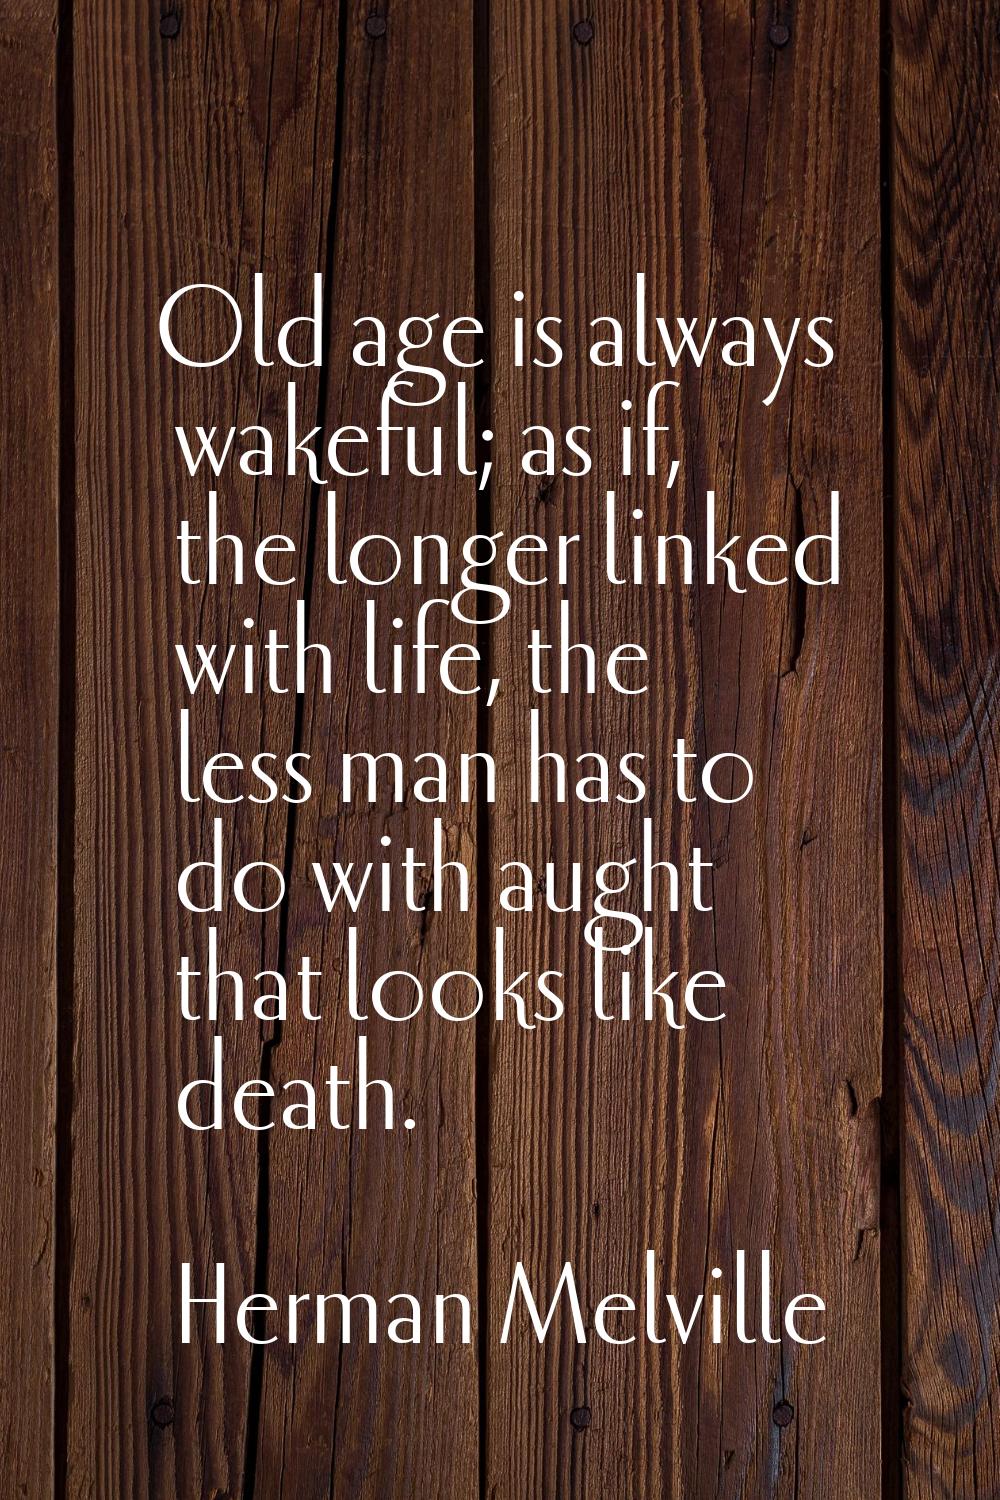 Old age is always wakeful; as if, the longer linked with life, the less man has to do with aught th